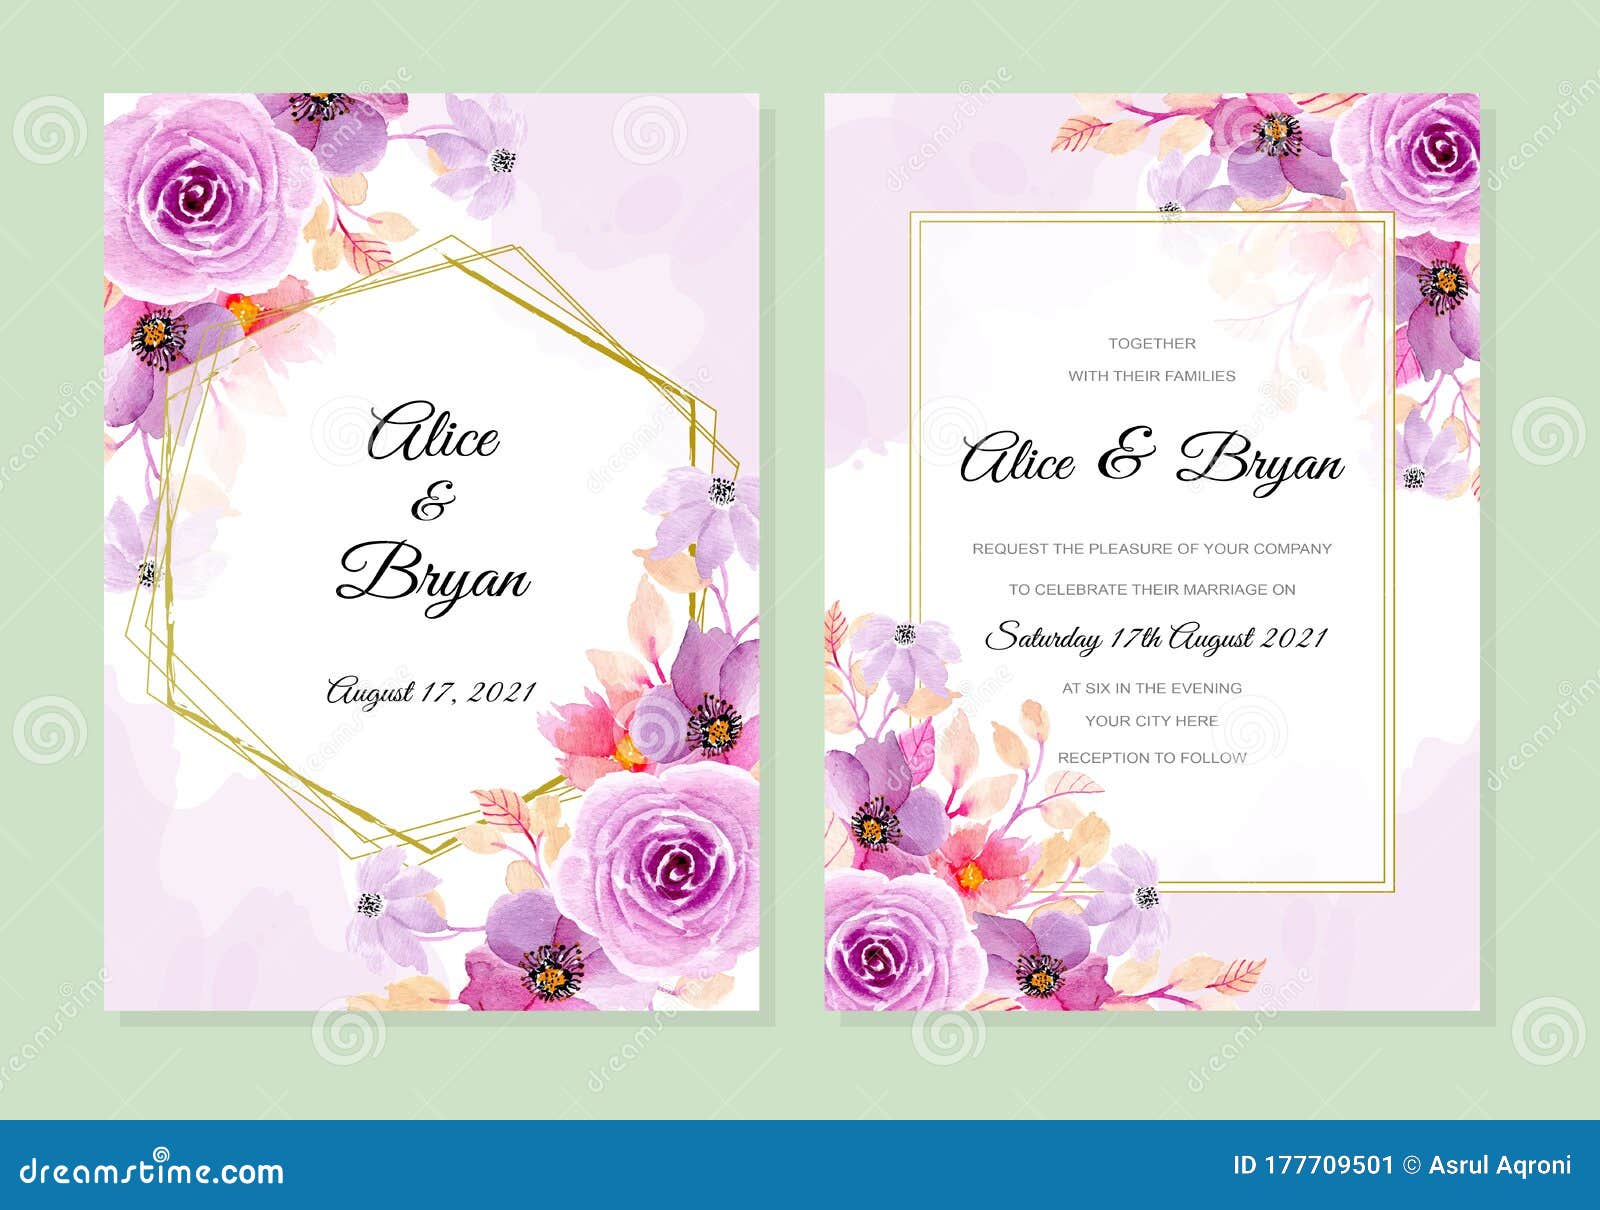 Wedding Invitation Card with Soft Purple Watercolor Background Stock Image  - Image of motif, design: 177709501